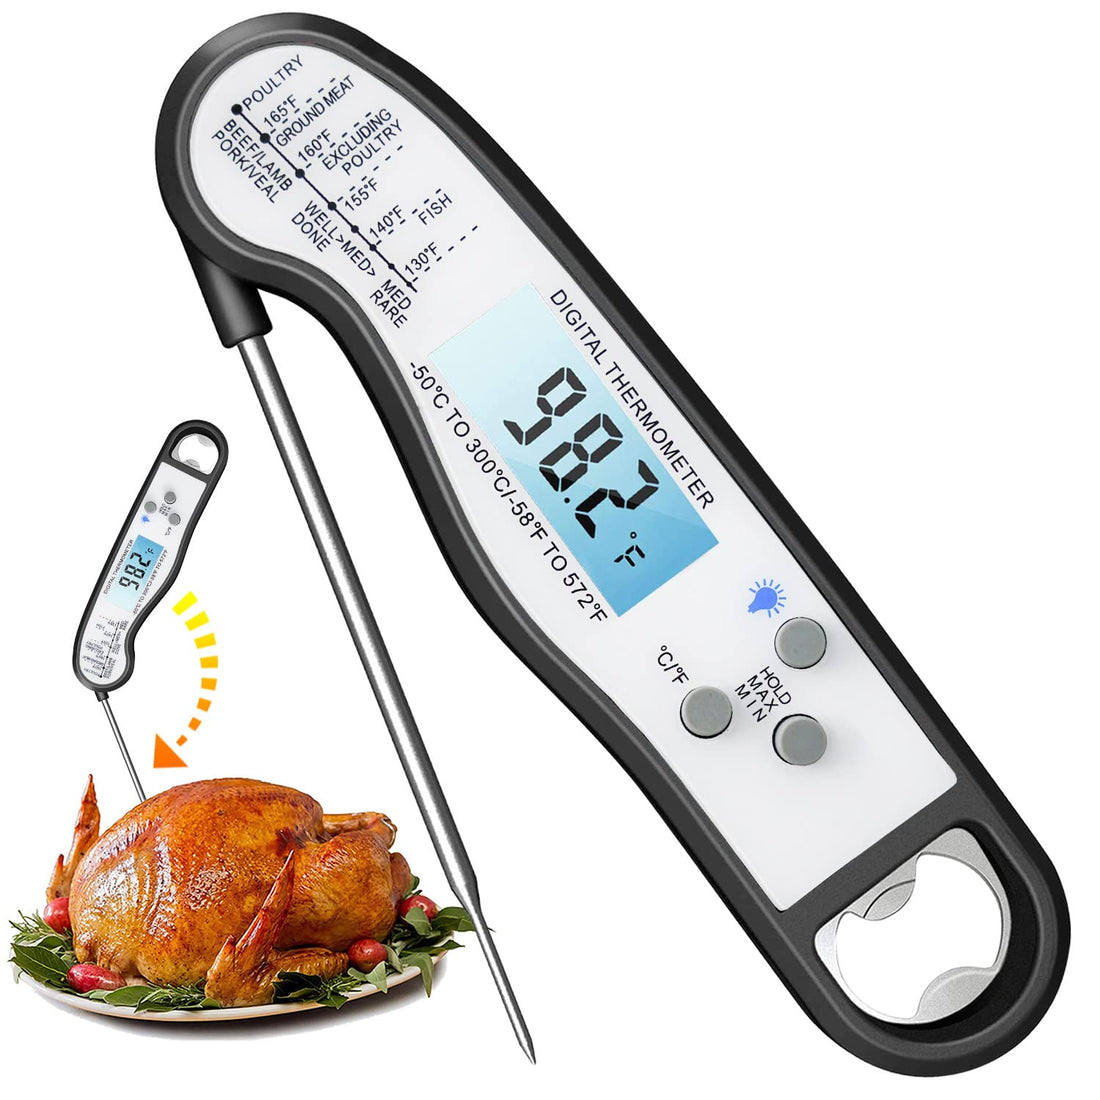 Digital Instant Read Meat Thermometer, Waterproof Ultra Fast Food Thermometer with Backlight and Calibration, Kitchen Cooking Thermometer Probe for Grilling Oven Smoker BBQ, Black